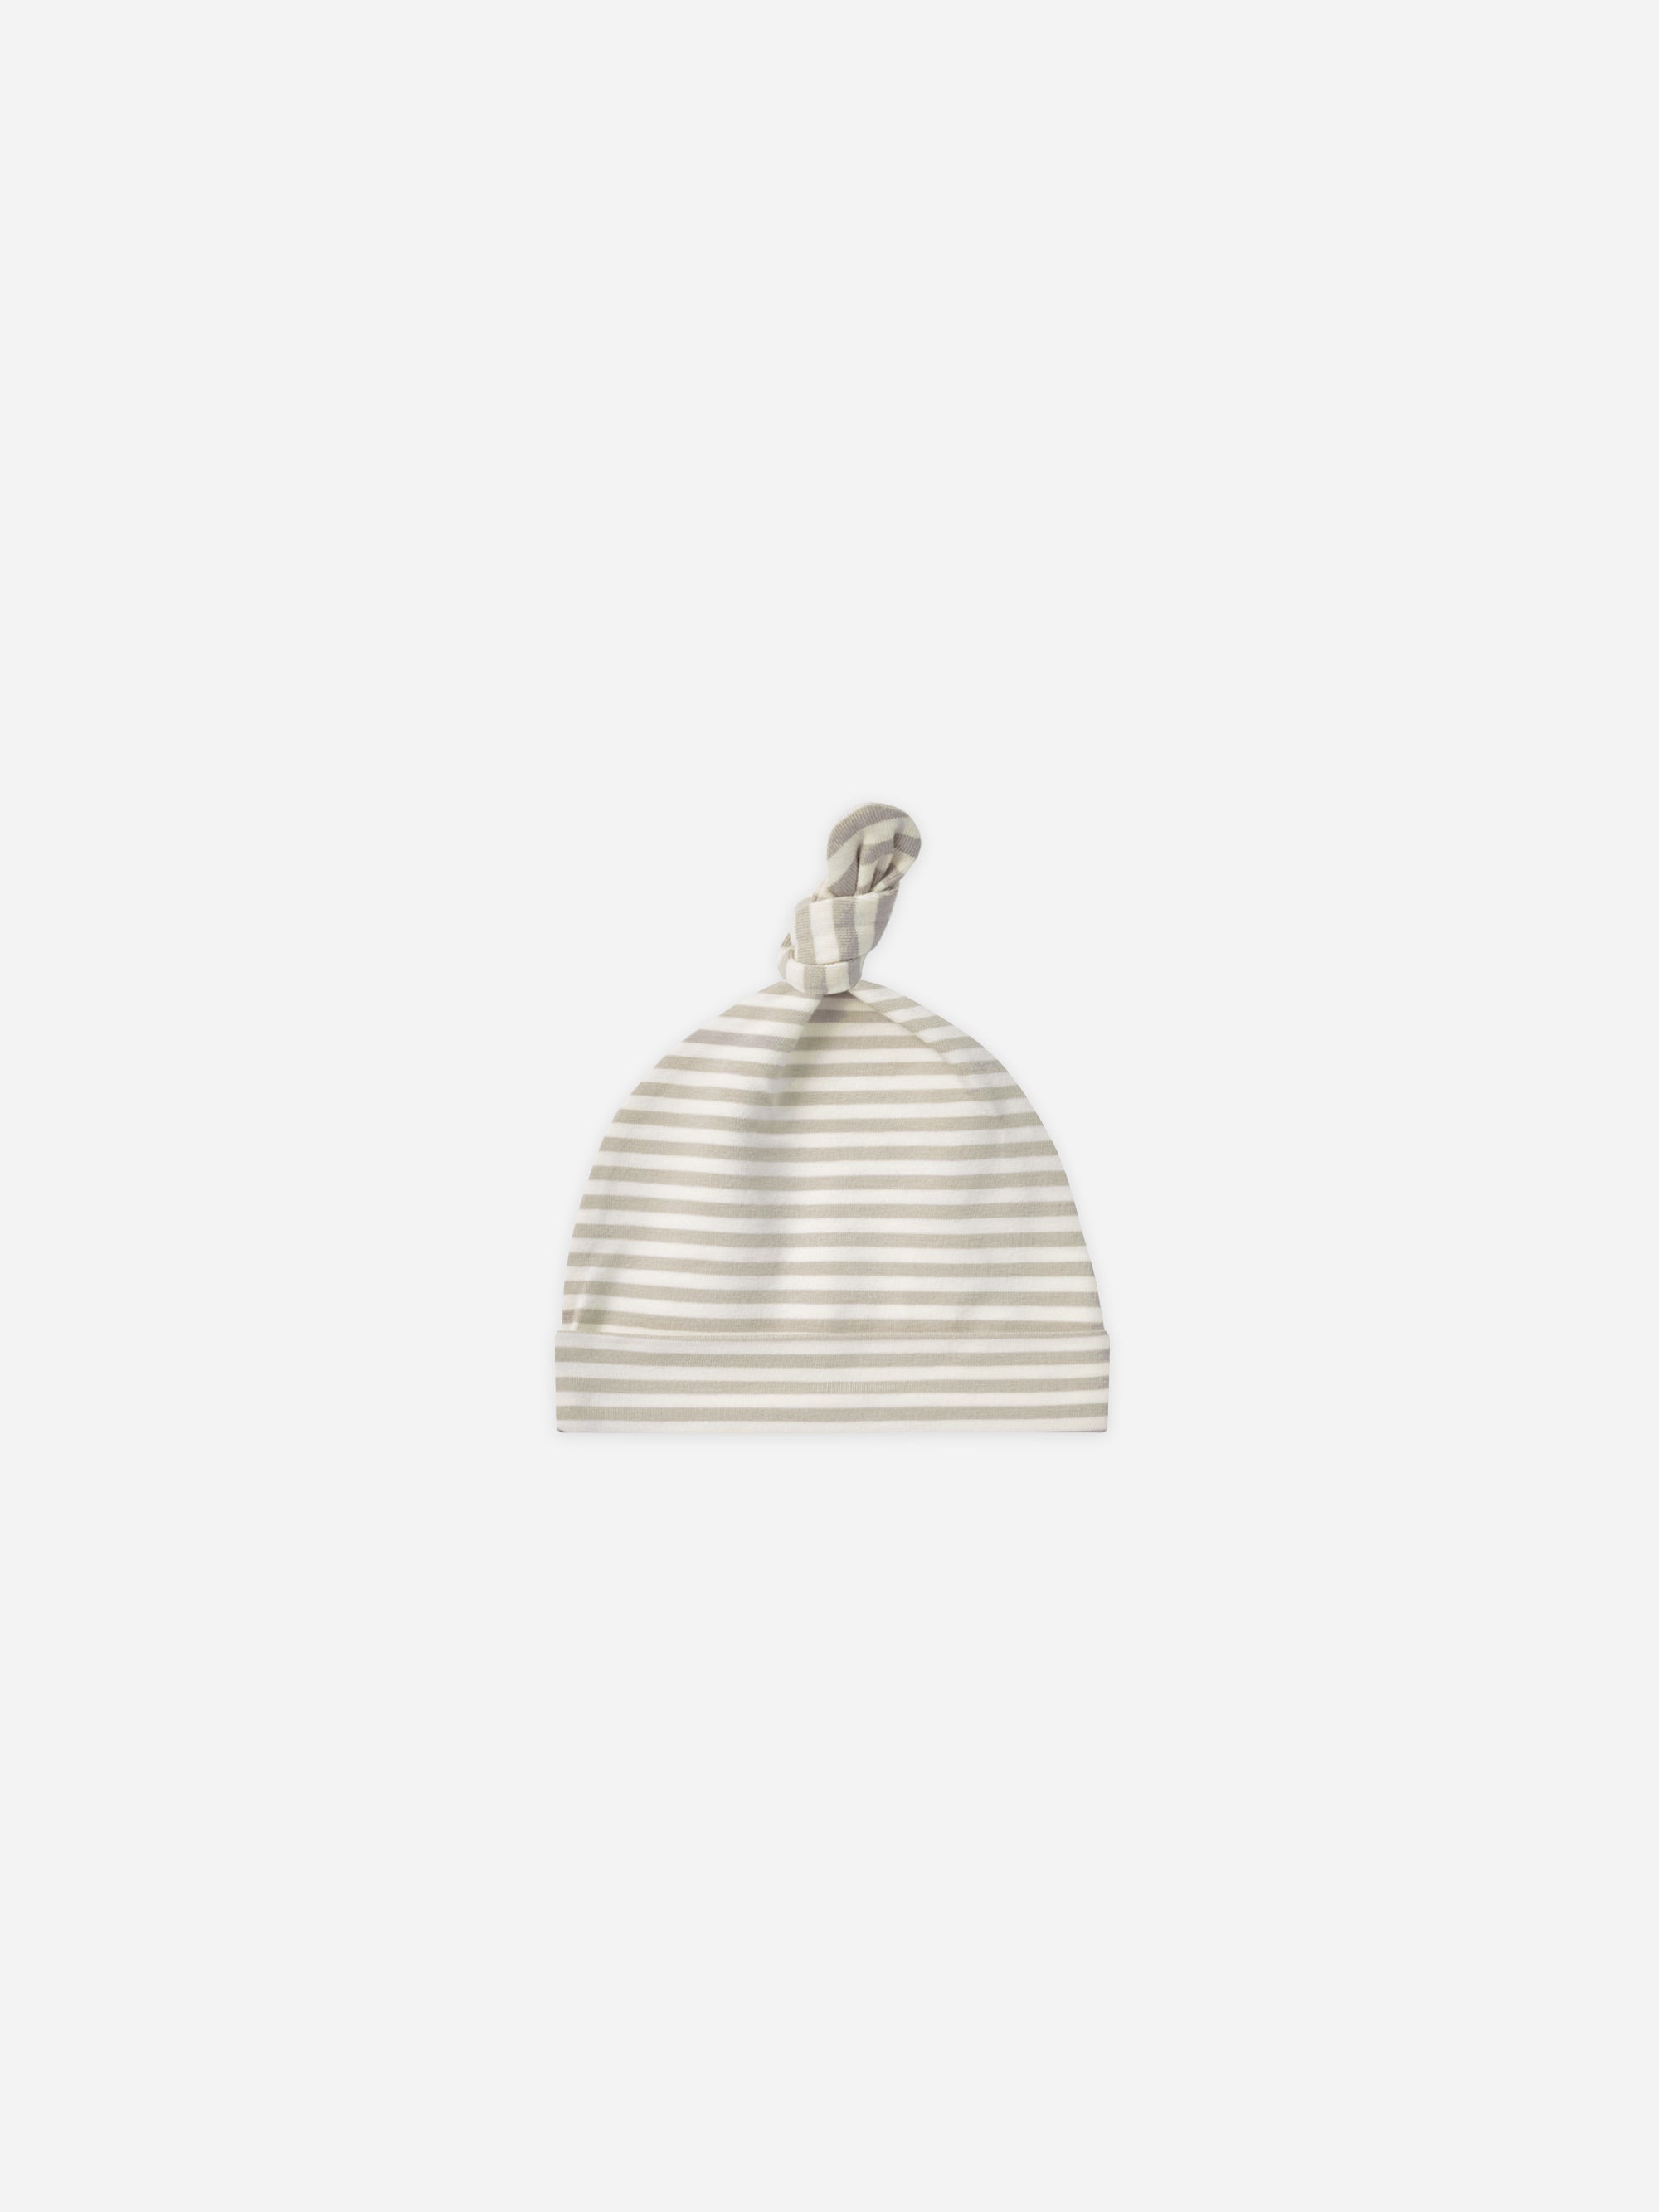 Knotted Baby Hat || Ash Stripe - Rylee + Cru | Kids Clothes | Trendy Baby Clothes | Modern Infant Outfits |